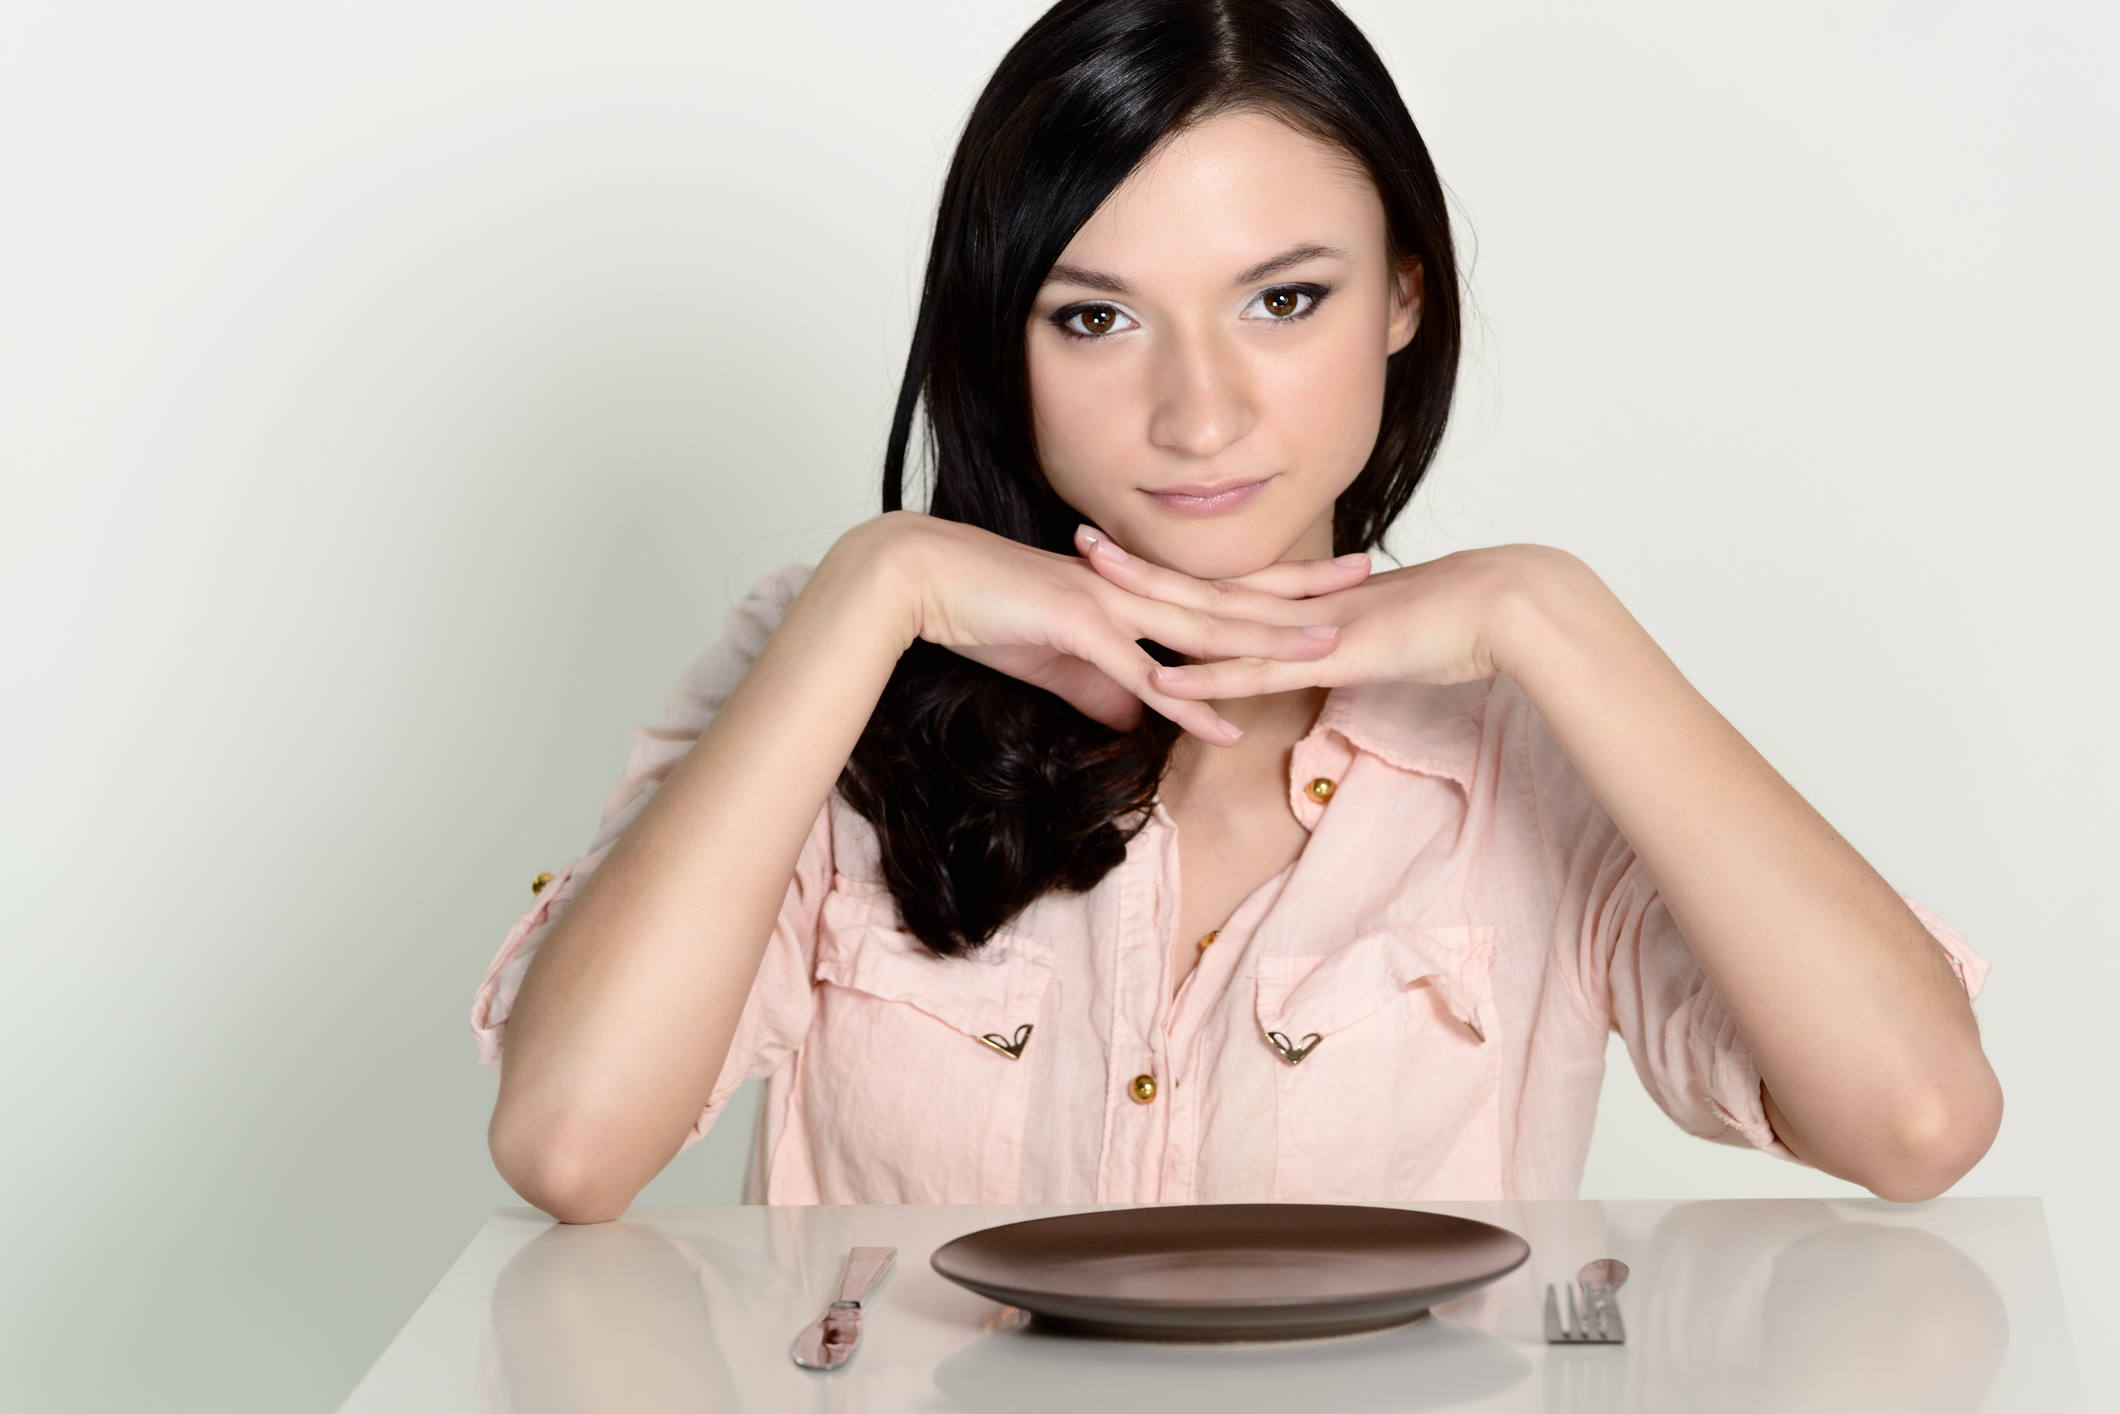 Waiting to eat - Intermittent fasting benefits